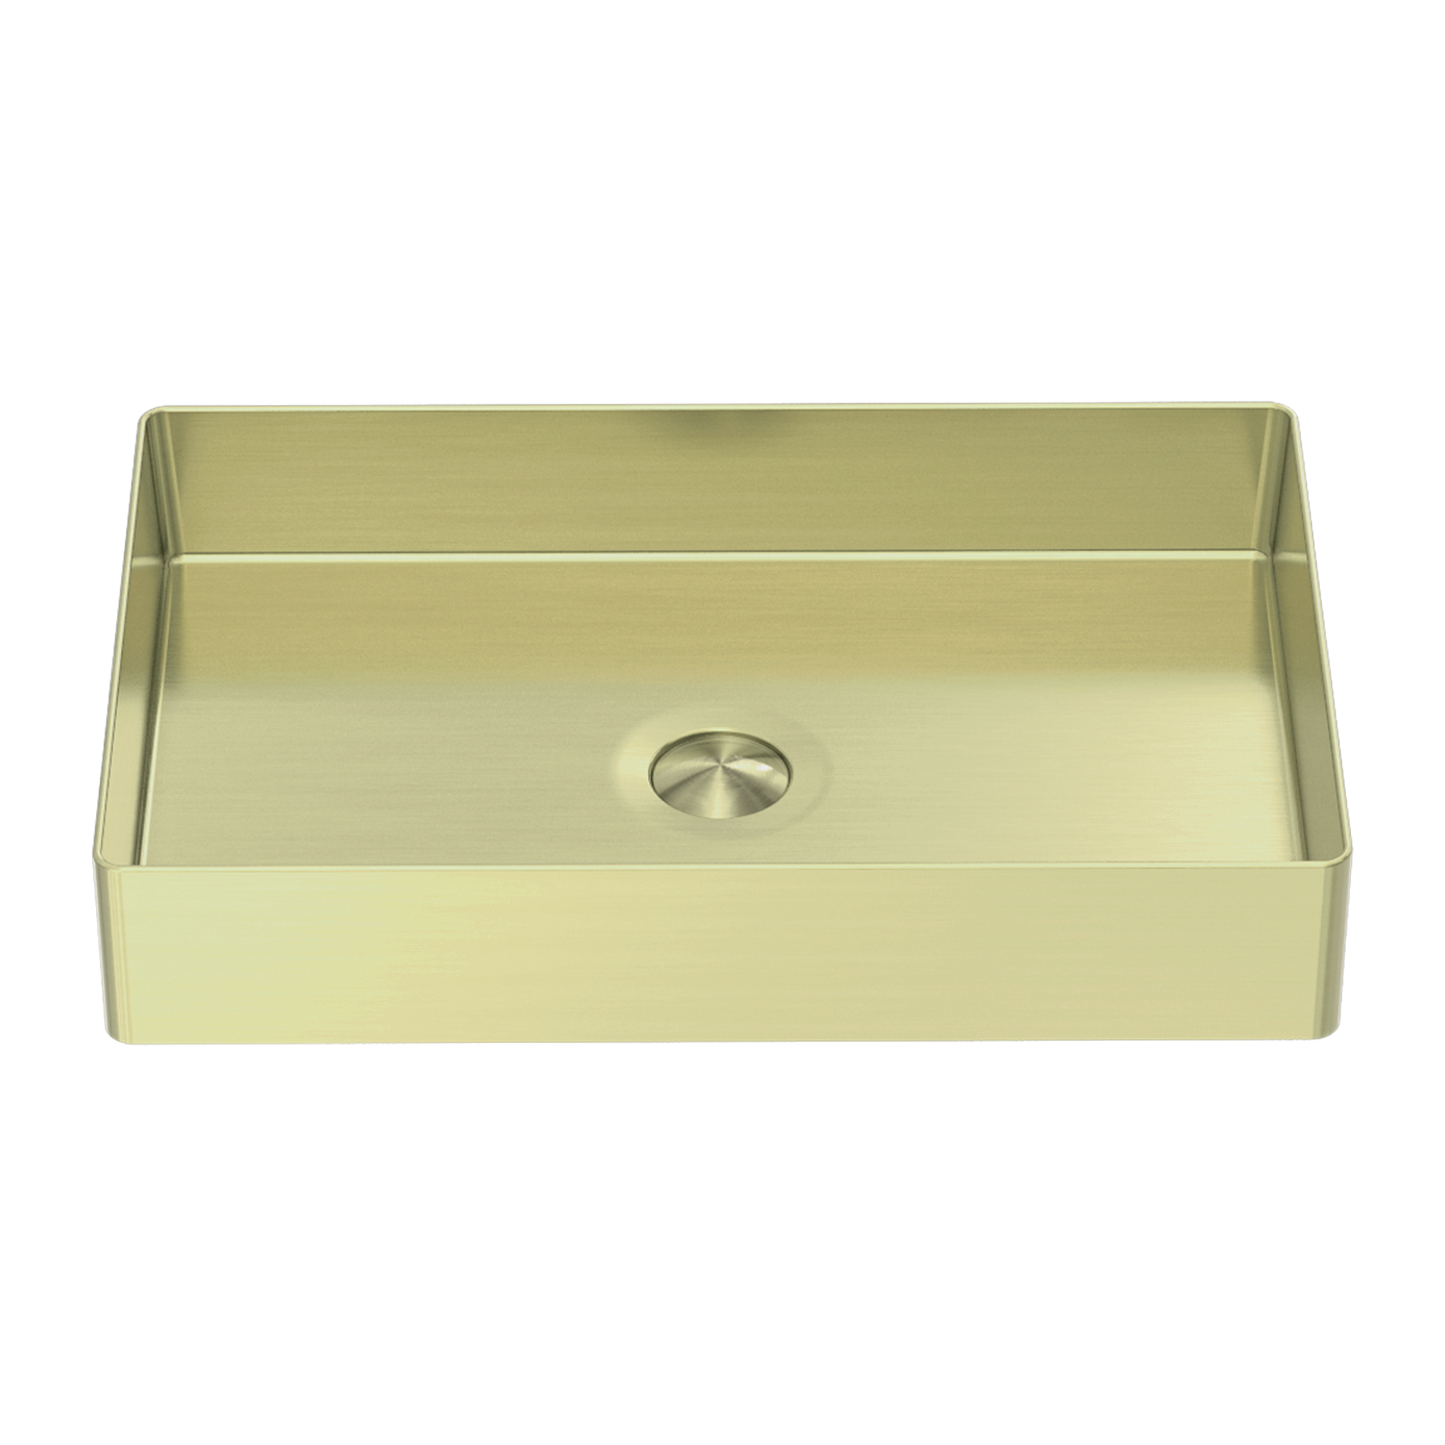 Stainless Steel Rectangle Counter Top Basin - Brushed Gold with PVD Coating